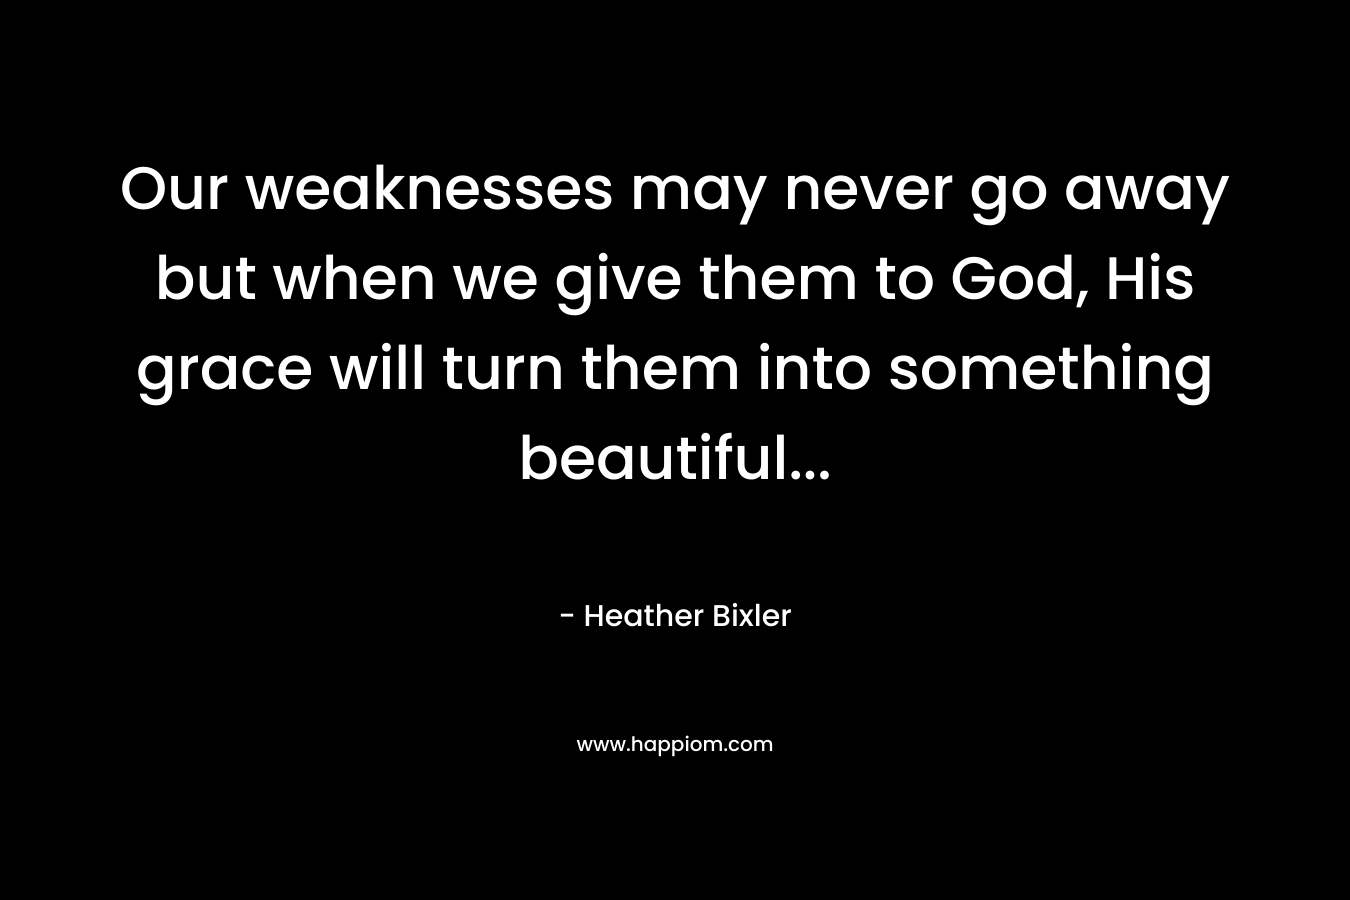 Our weaknesses may never go away but when we give them to God, His grace will turn them into something beautiful… – Heather Bixler